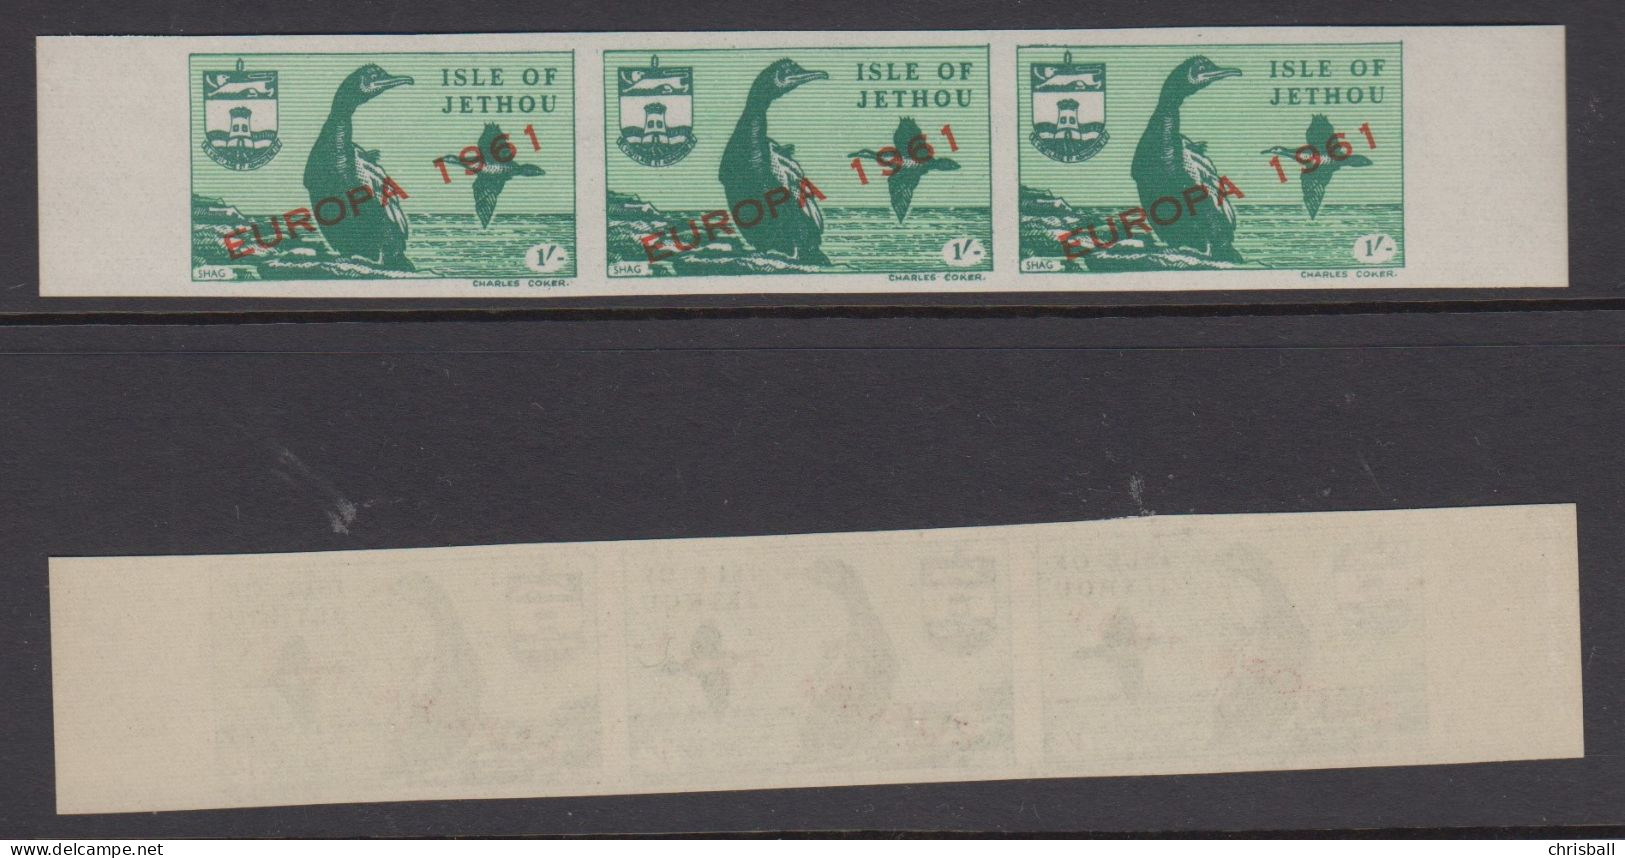 Jethou - Guernsey Strip 3 1/- Europa 1961 IMPERF. Thin Newsprint Type Paper - Guernesey